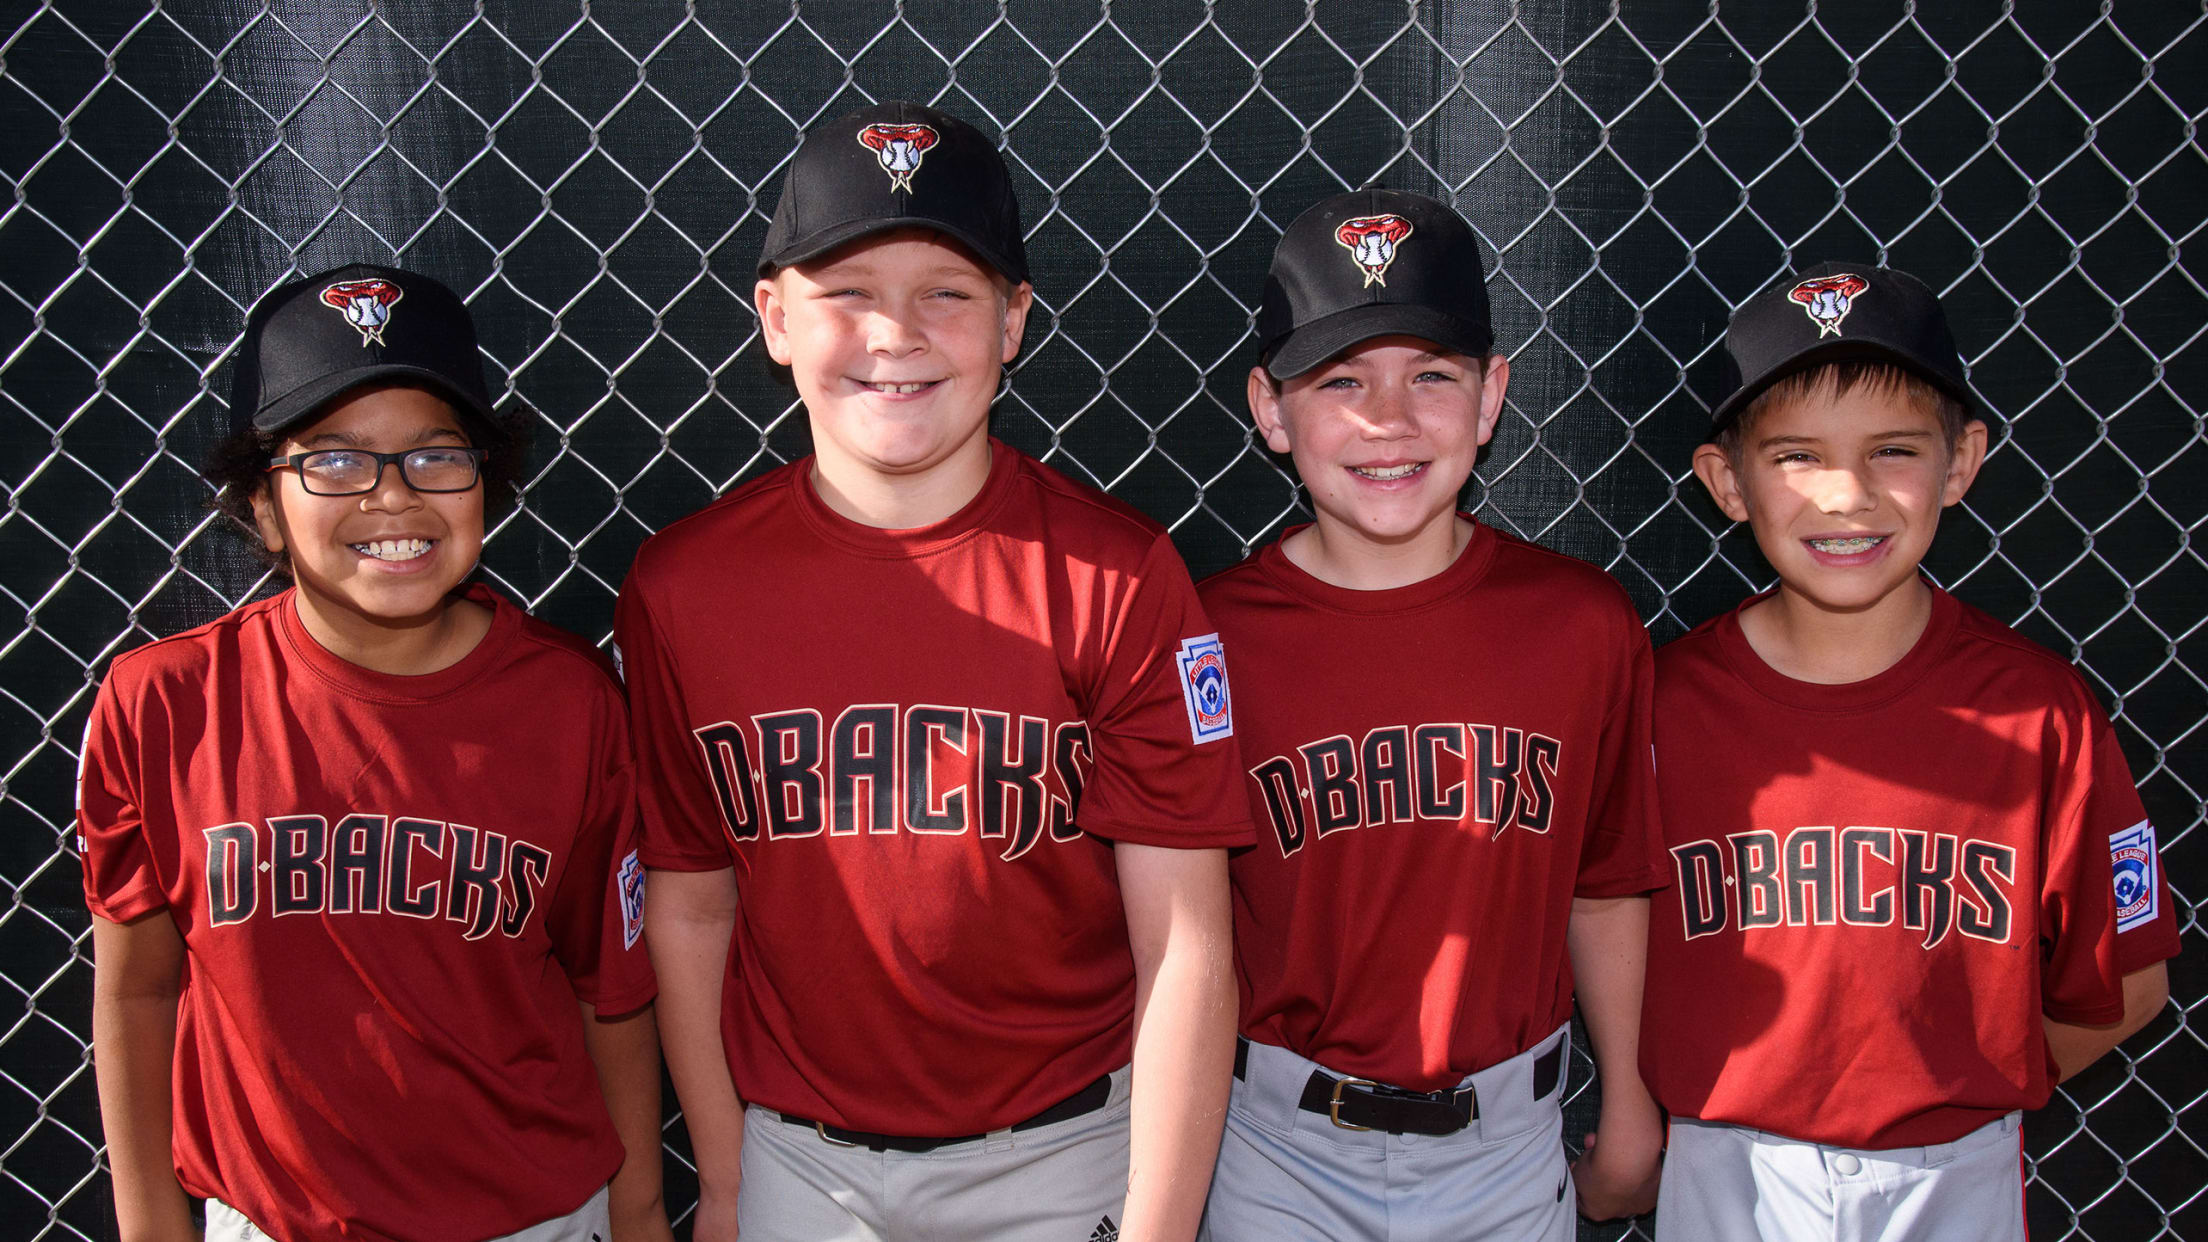 About the D-backs Foundation